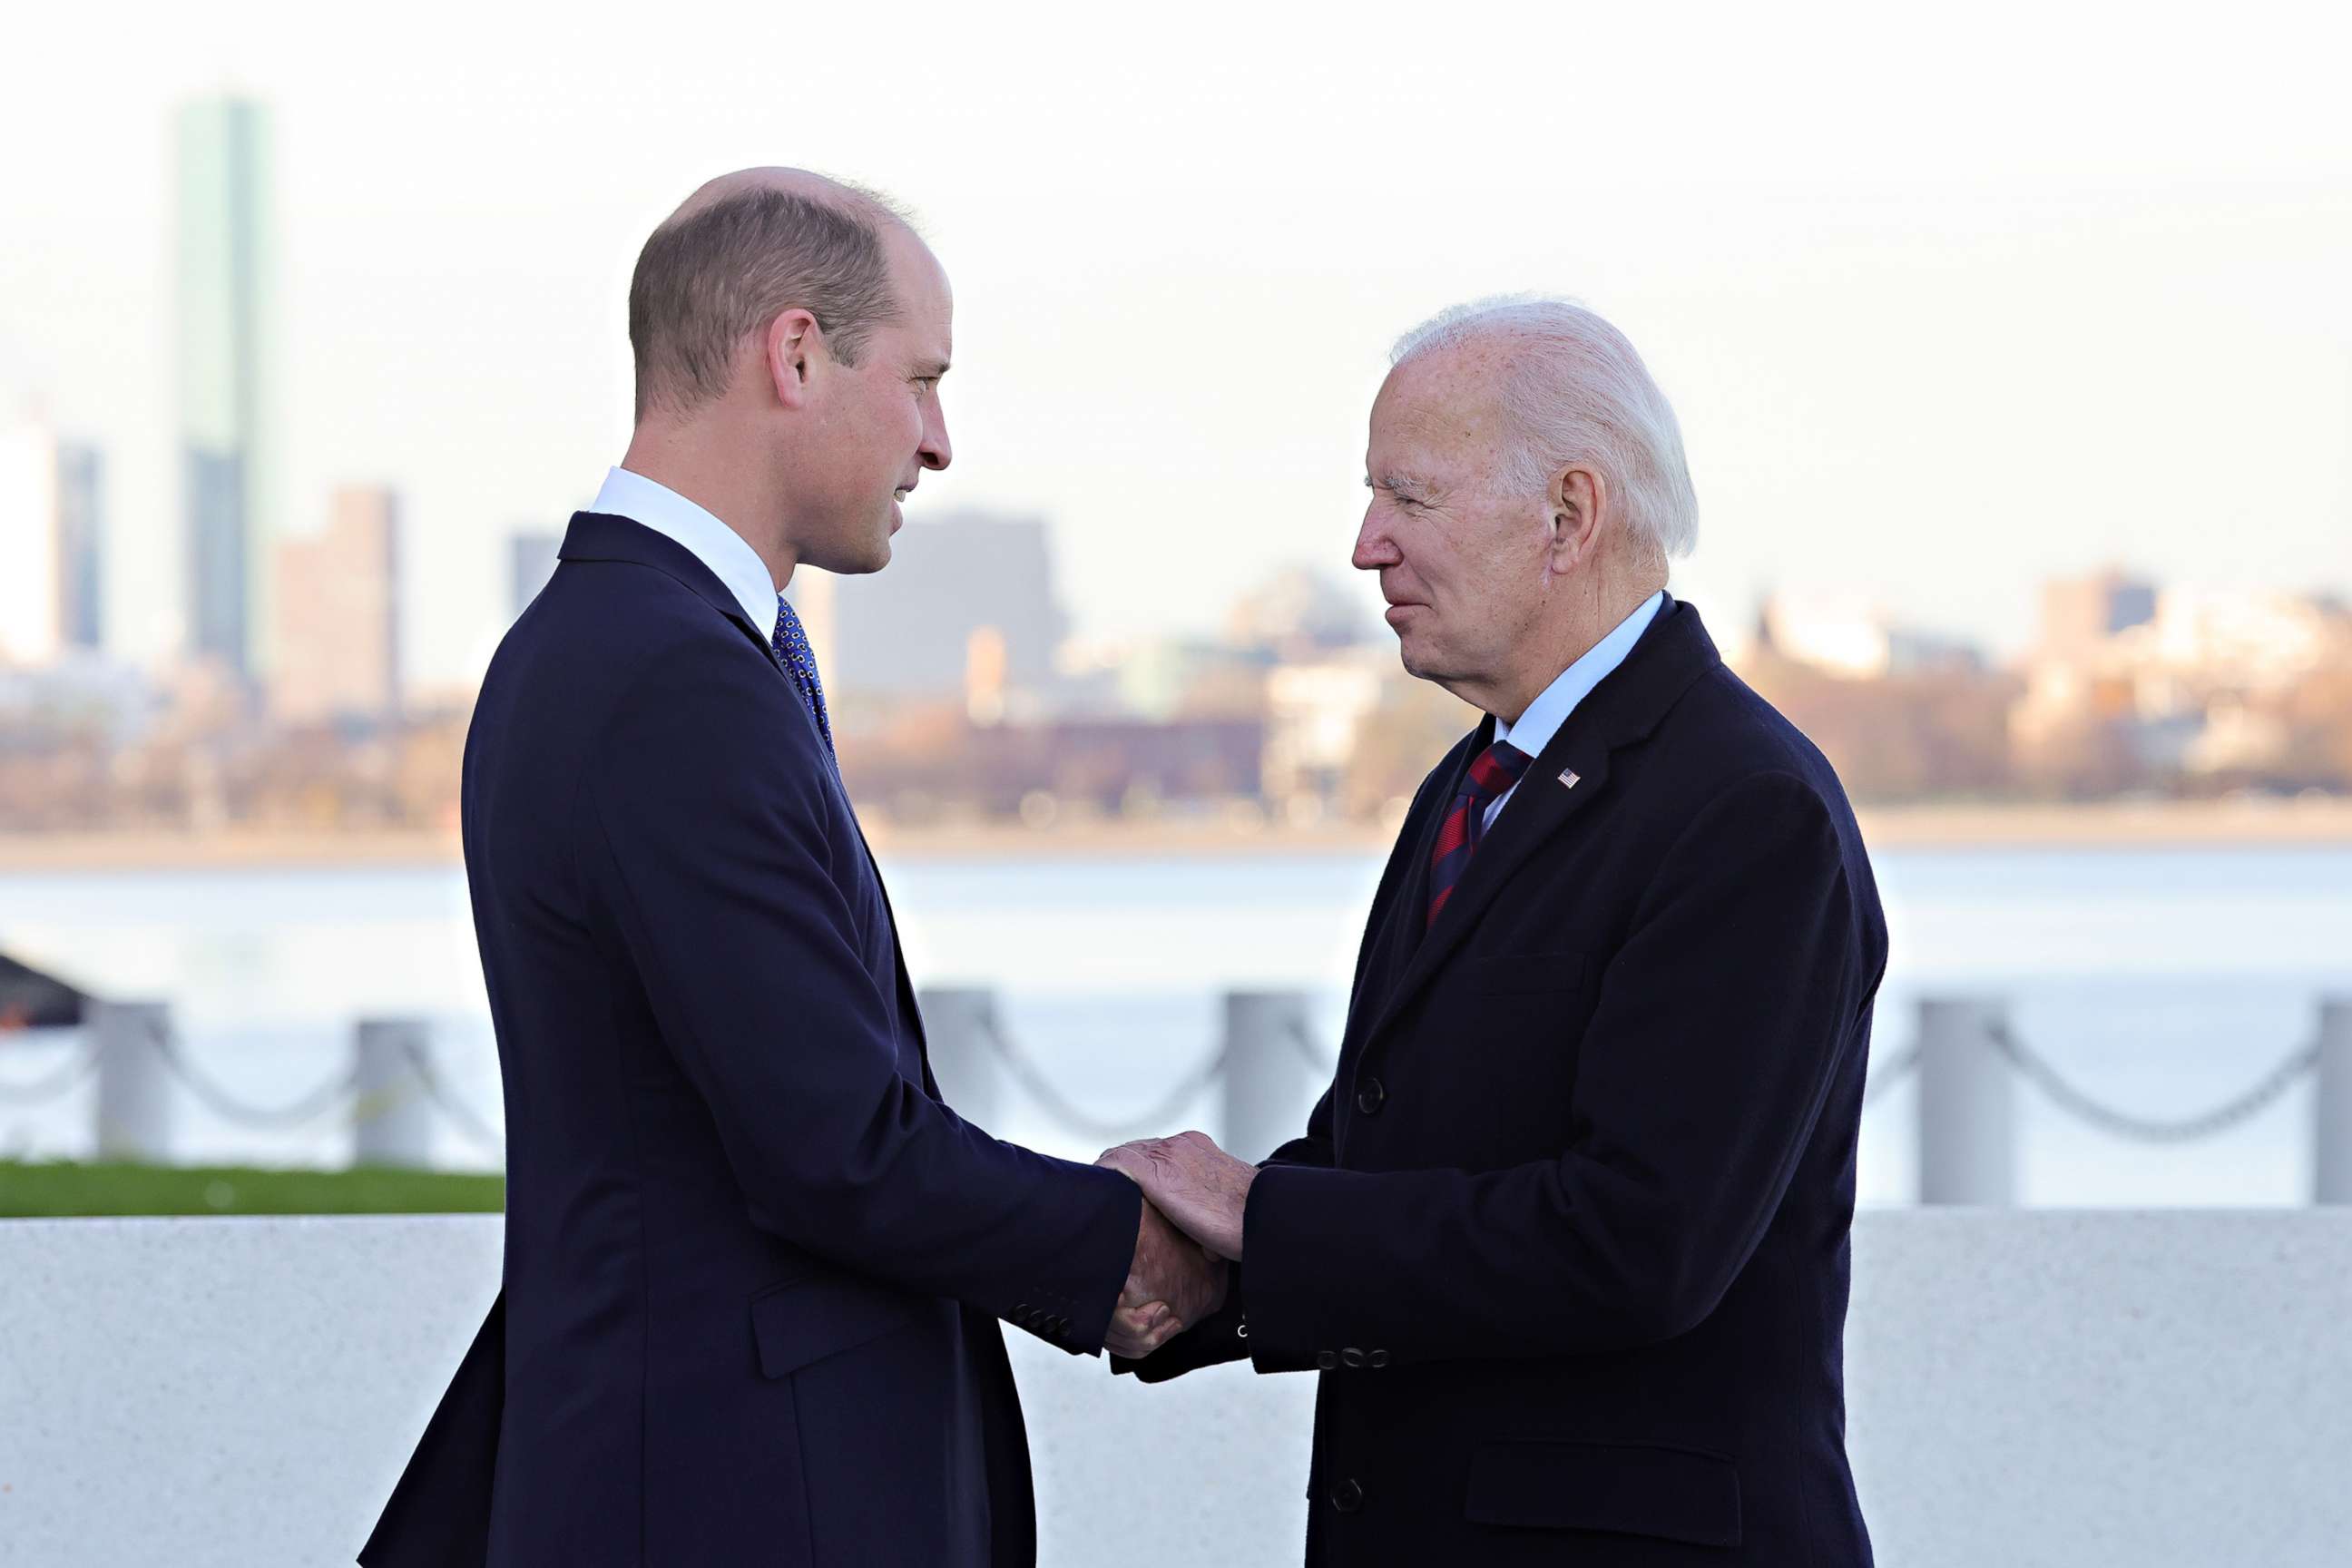 PHOTO: Prince William, Prince of Wales meets with President Joe Biden at the John F. Kennedy Presidential Library and Museum on Dec. 02, 2022 in Boston.